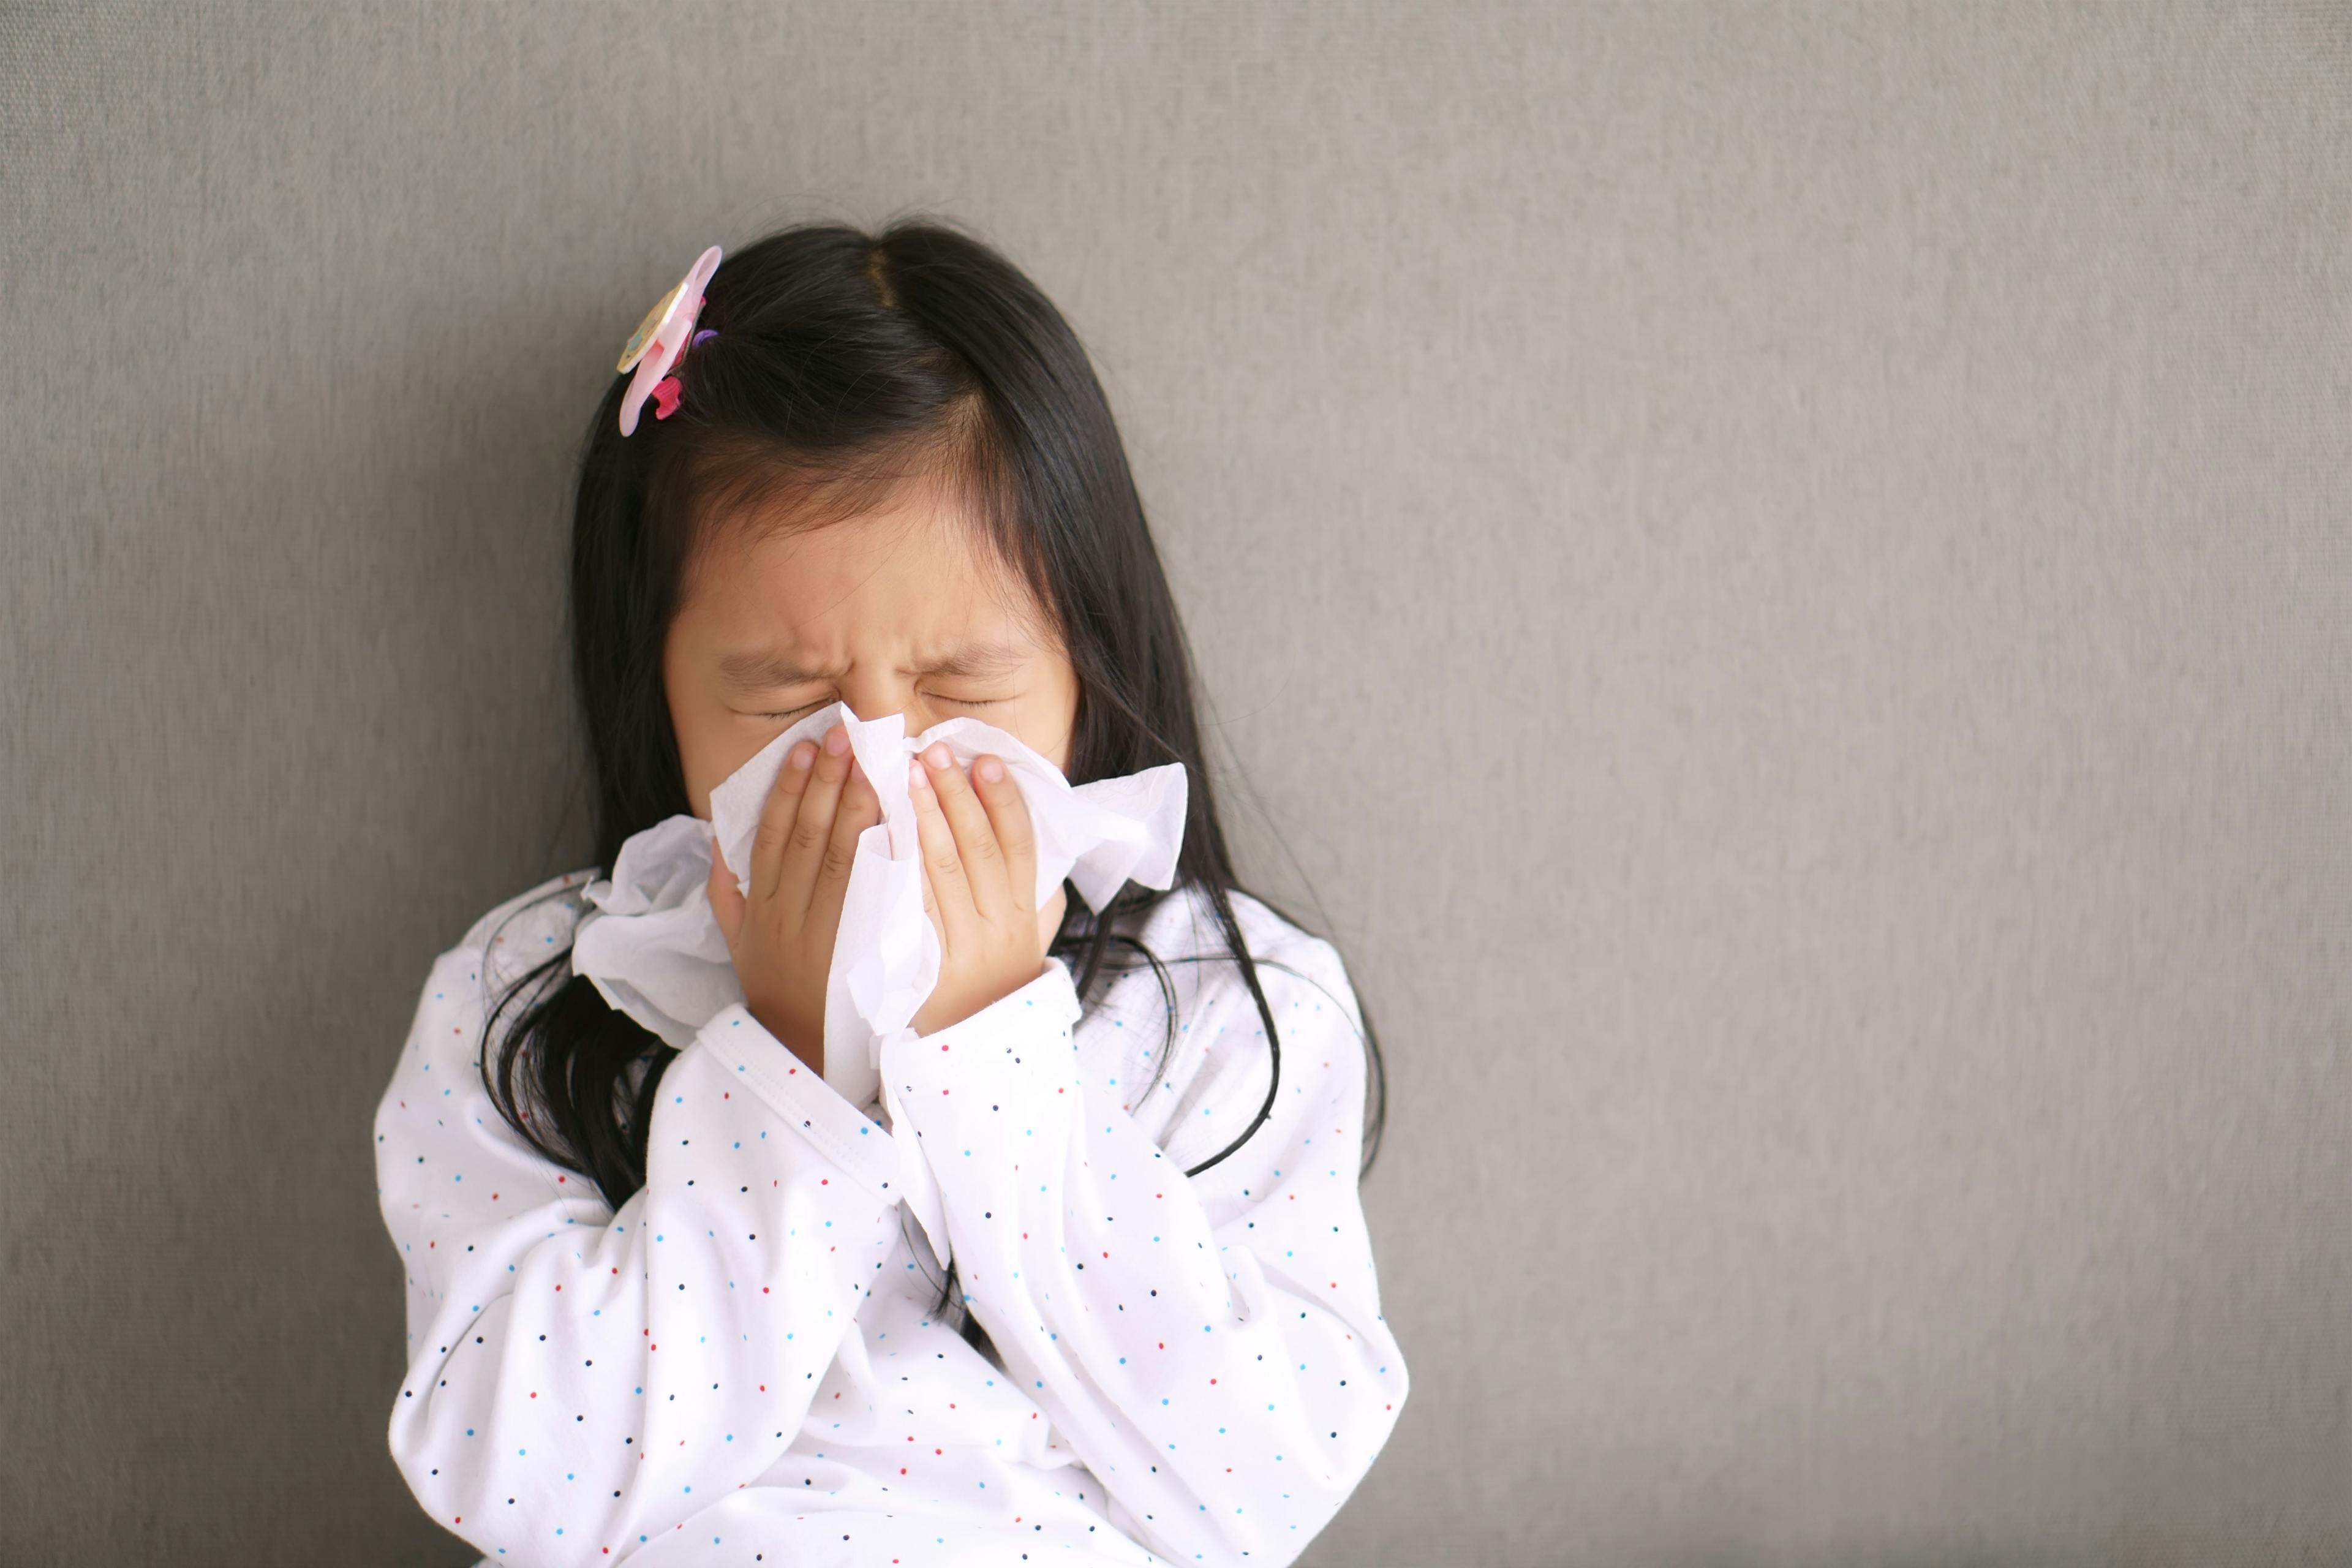 Odactra Approved by FDA for Treatment of House Dust Mite-Induced Allergic Rhinitis